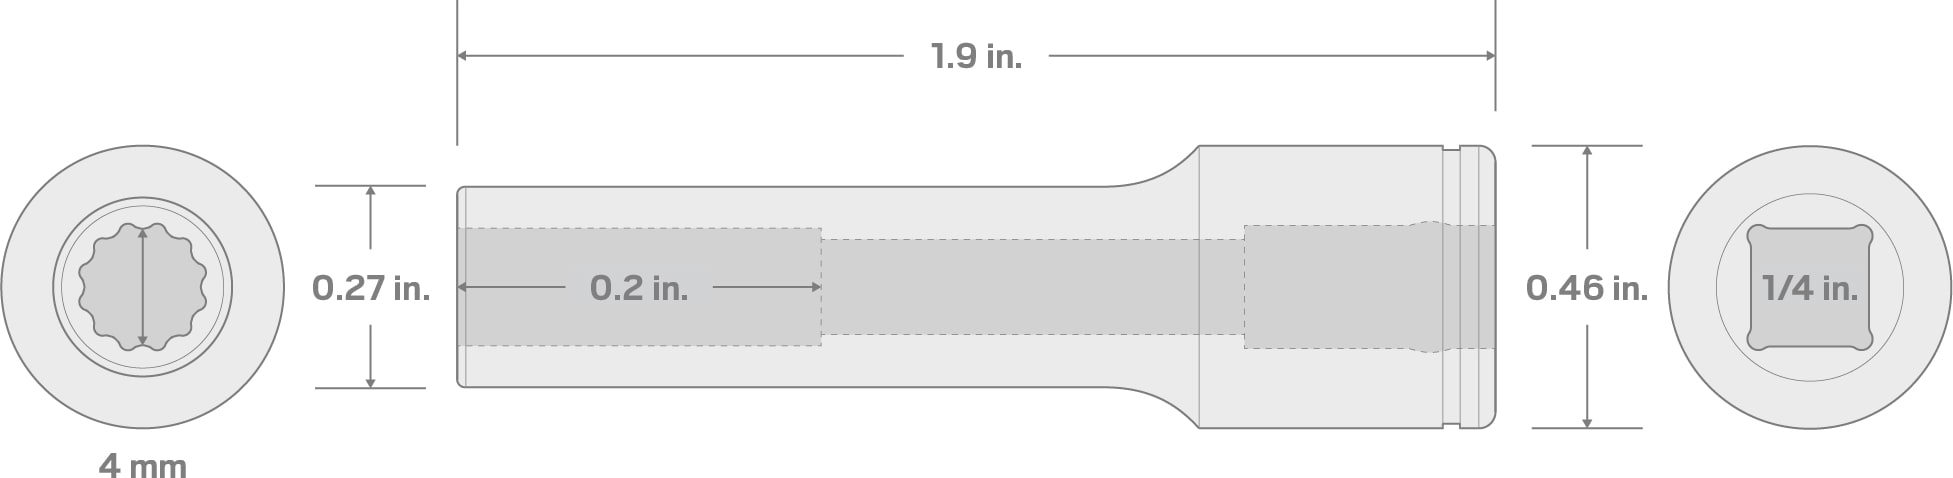 Specs for 1/4 Inch Drive x 4 mm Deep 12-Point Socket